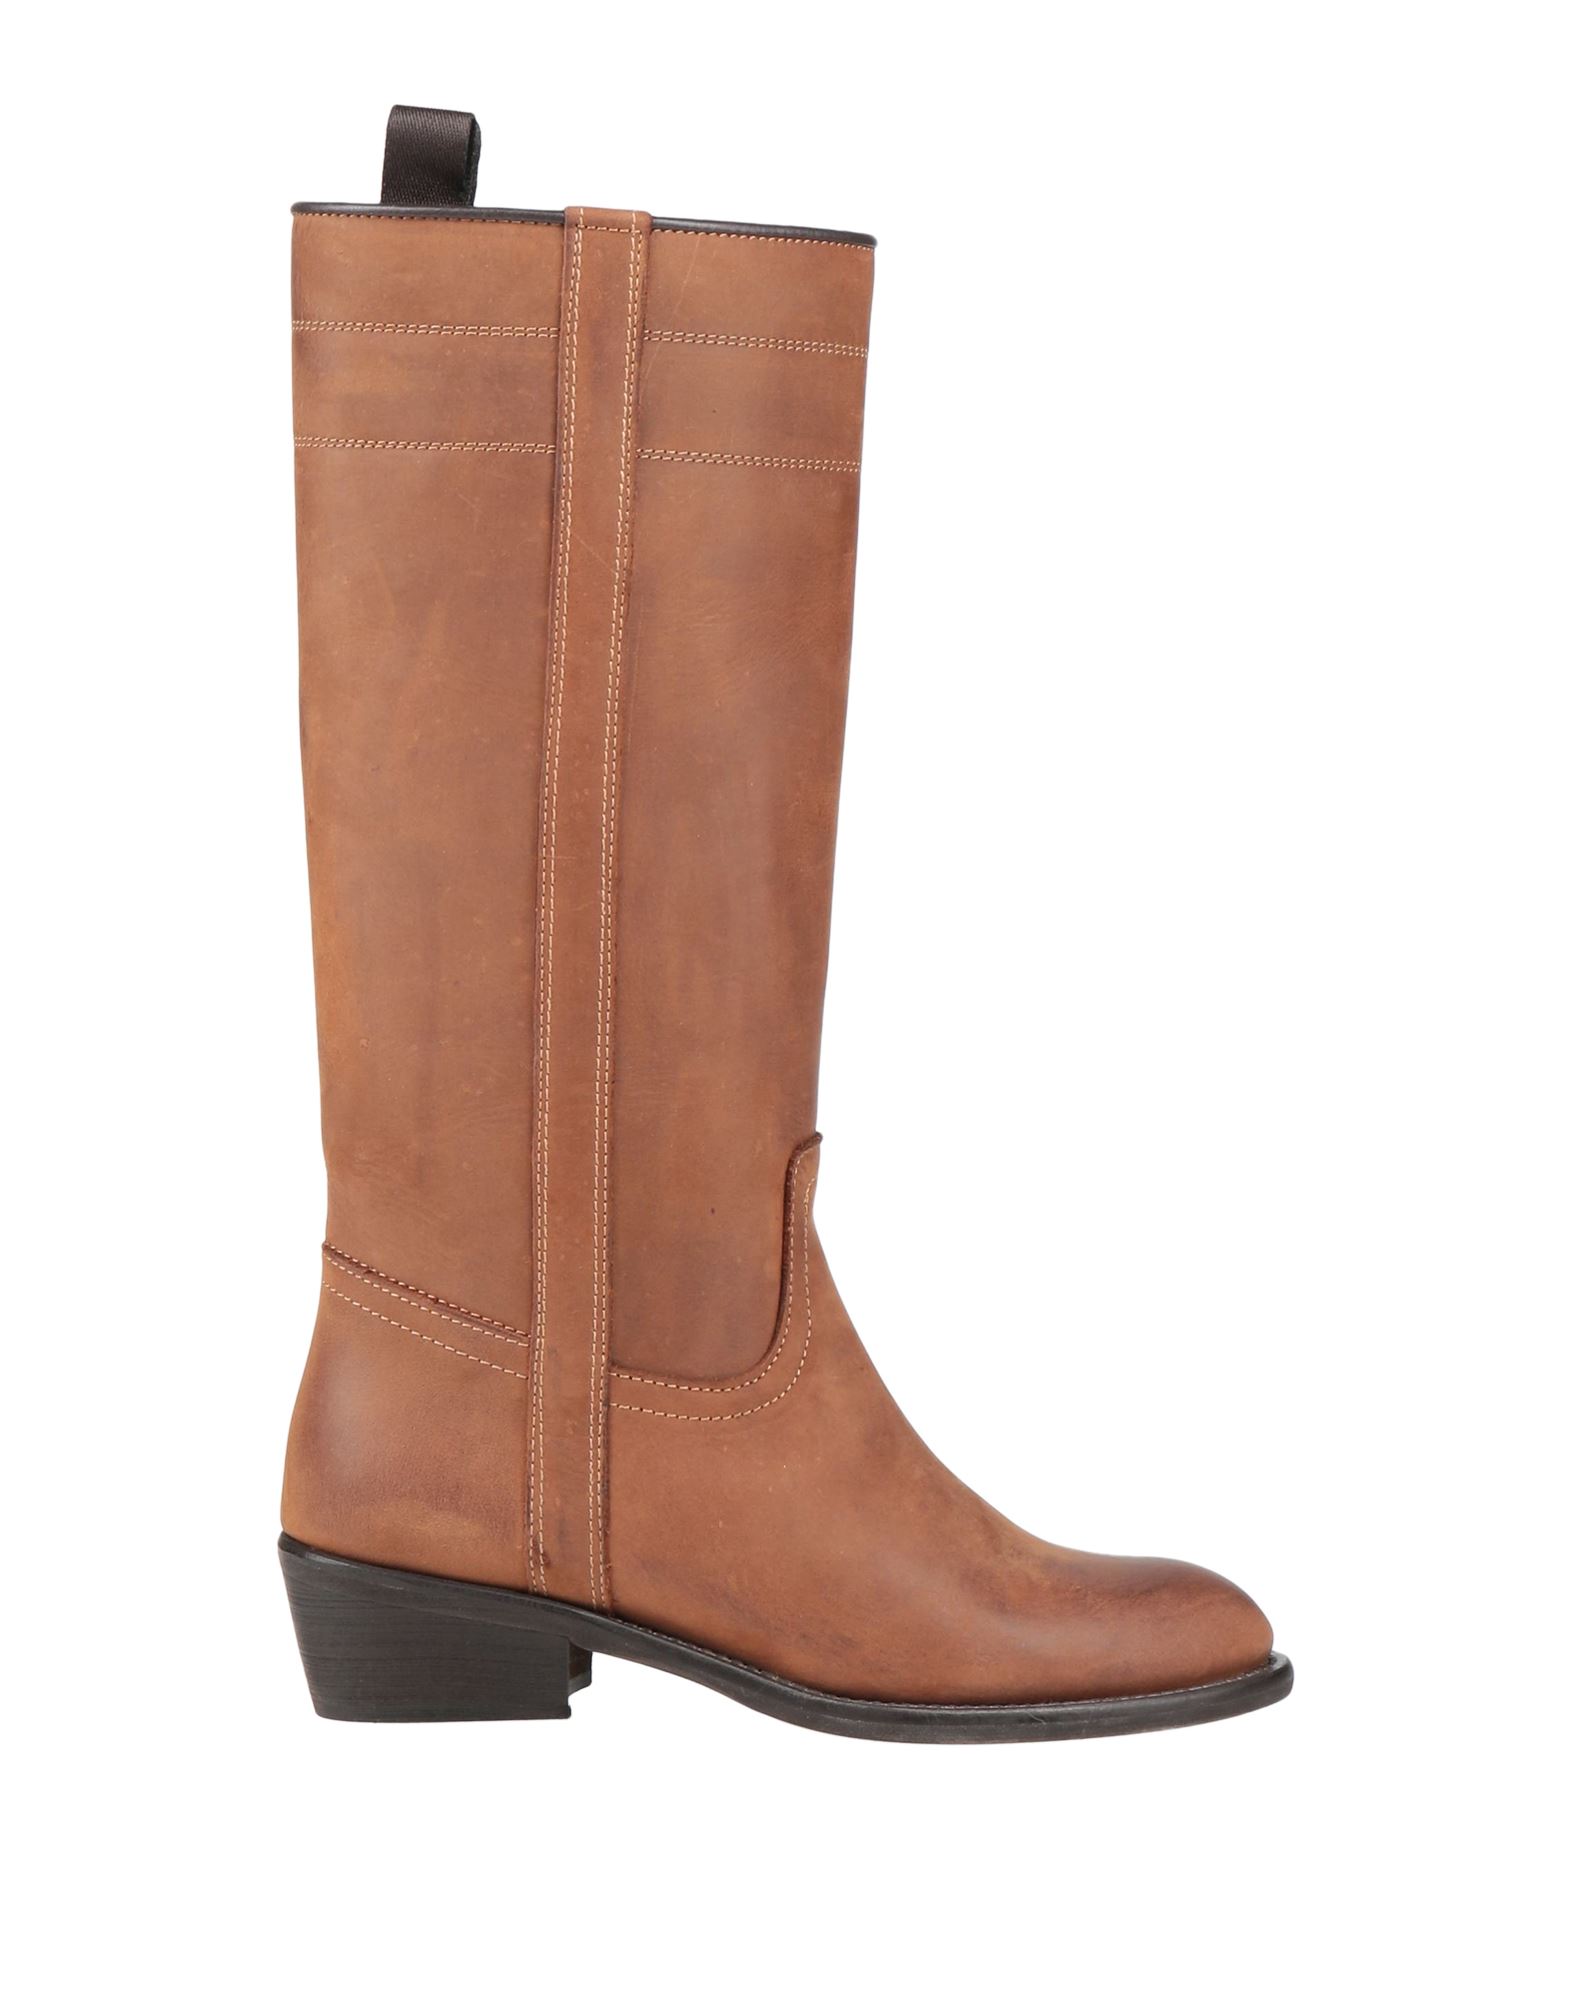 OVYE' BY CRISTINA LUCCHI OVYE' BY CRISTINA LUCCHI WOMAN BOOT TAN SIZE 7 SOFT LEATHER